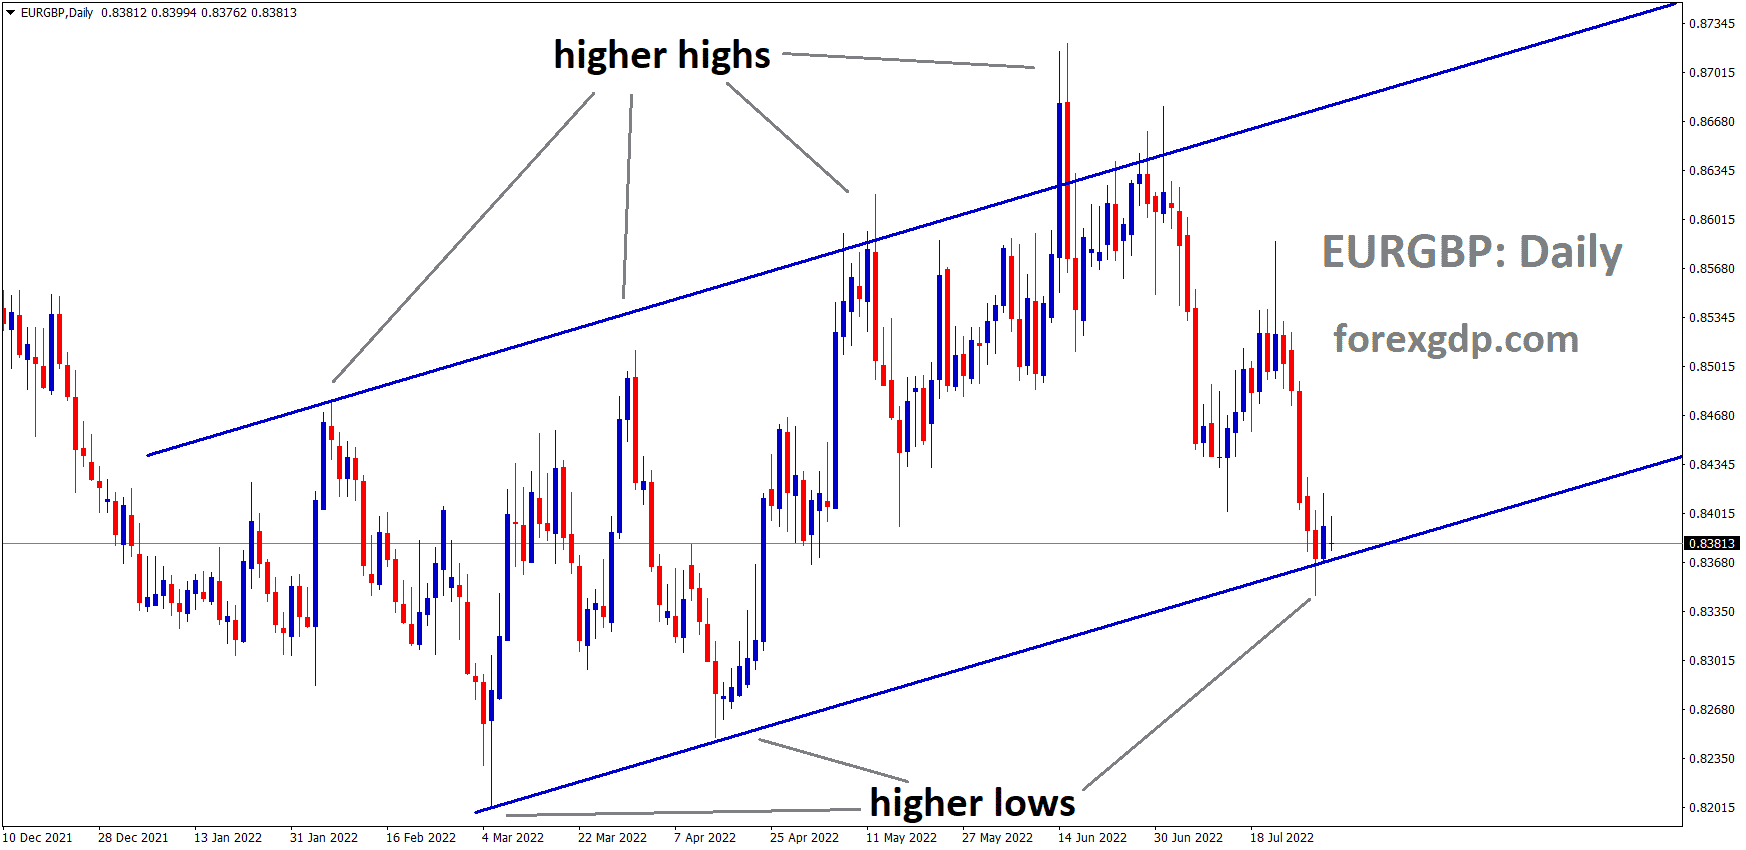 EURGBP is moving in an Ascending channel and the Market has reached the higher low area of the channel.